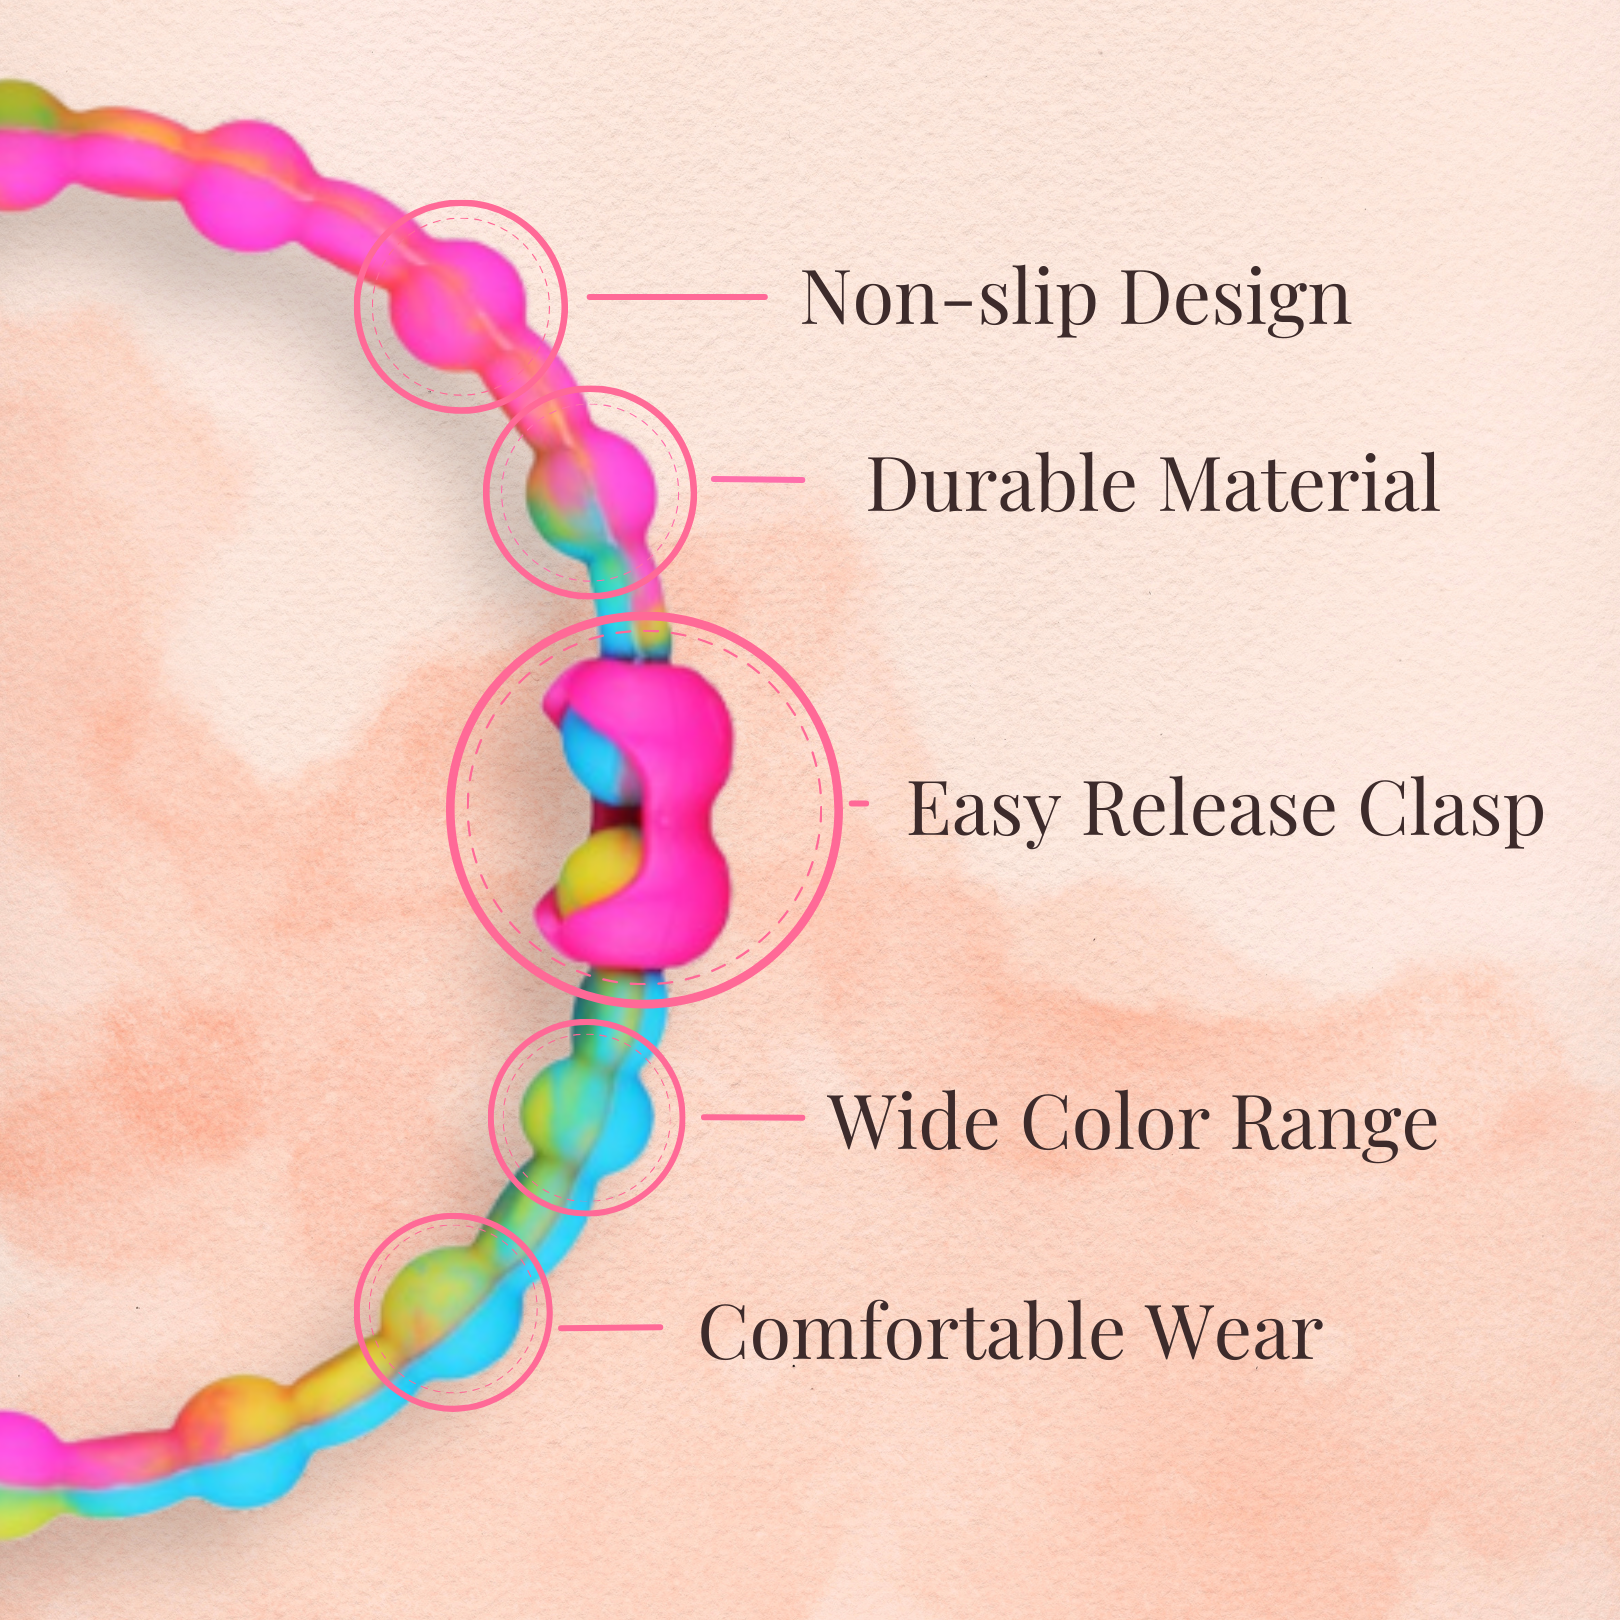 Autumn Spice Pack PRO Hair Ties: Easy Release Adjustable for Every Hair Type PACK OF 4